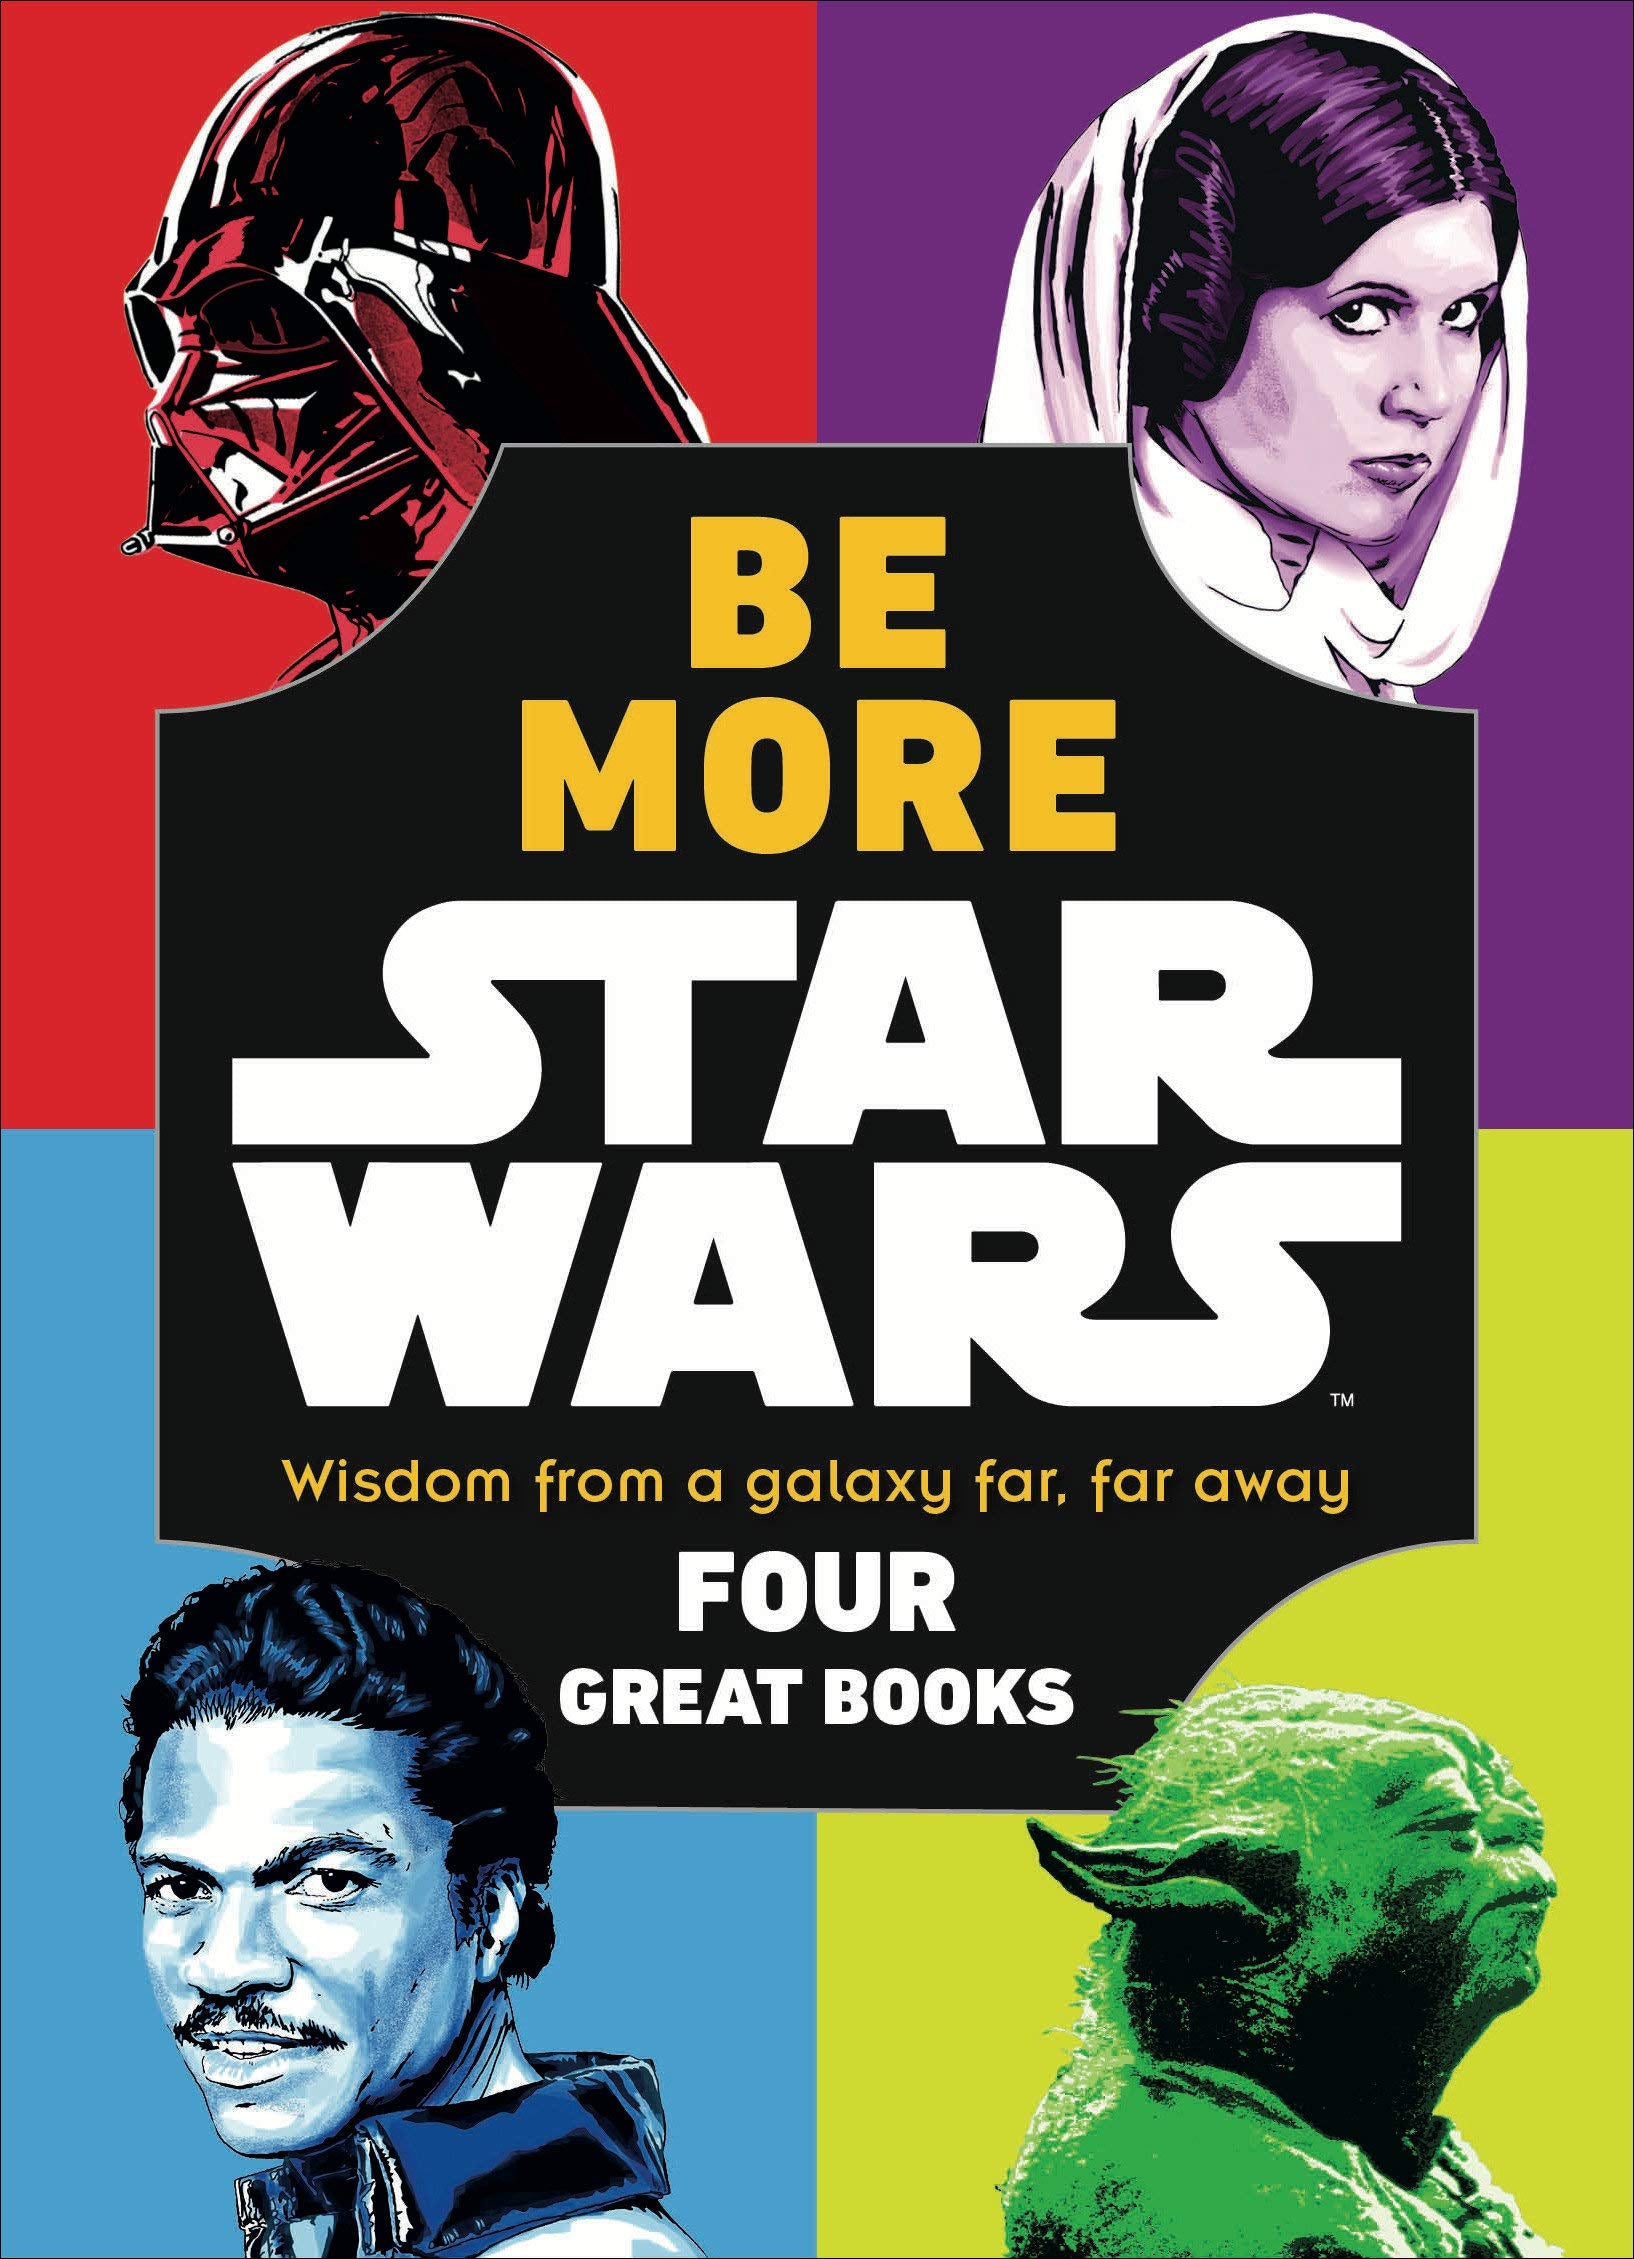 Star Wars Be More Box Set: Wisdom From a Galaxy Far, Far, Away Four Great Books Hardcover by Christian Blauvelt (Author)